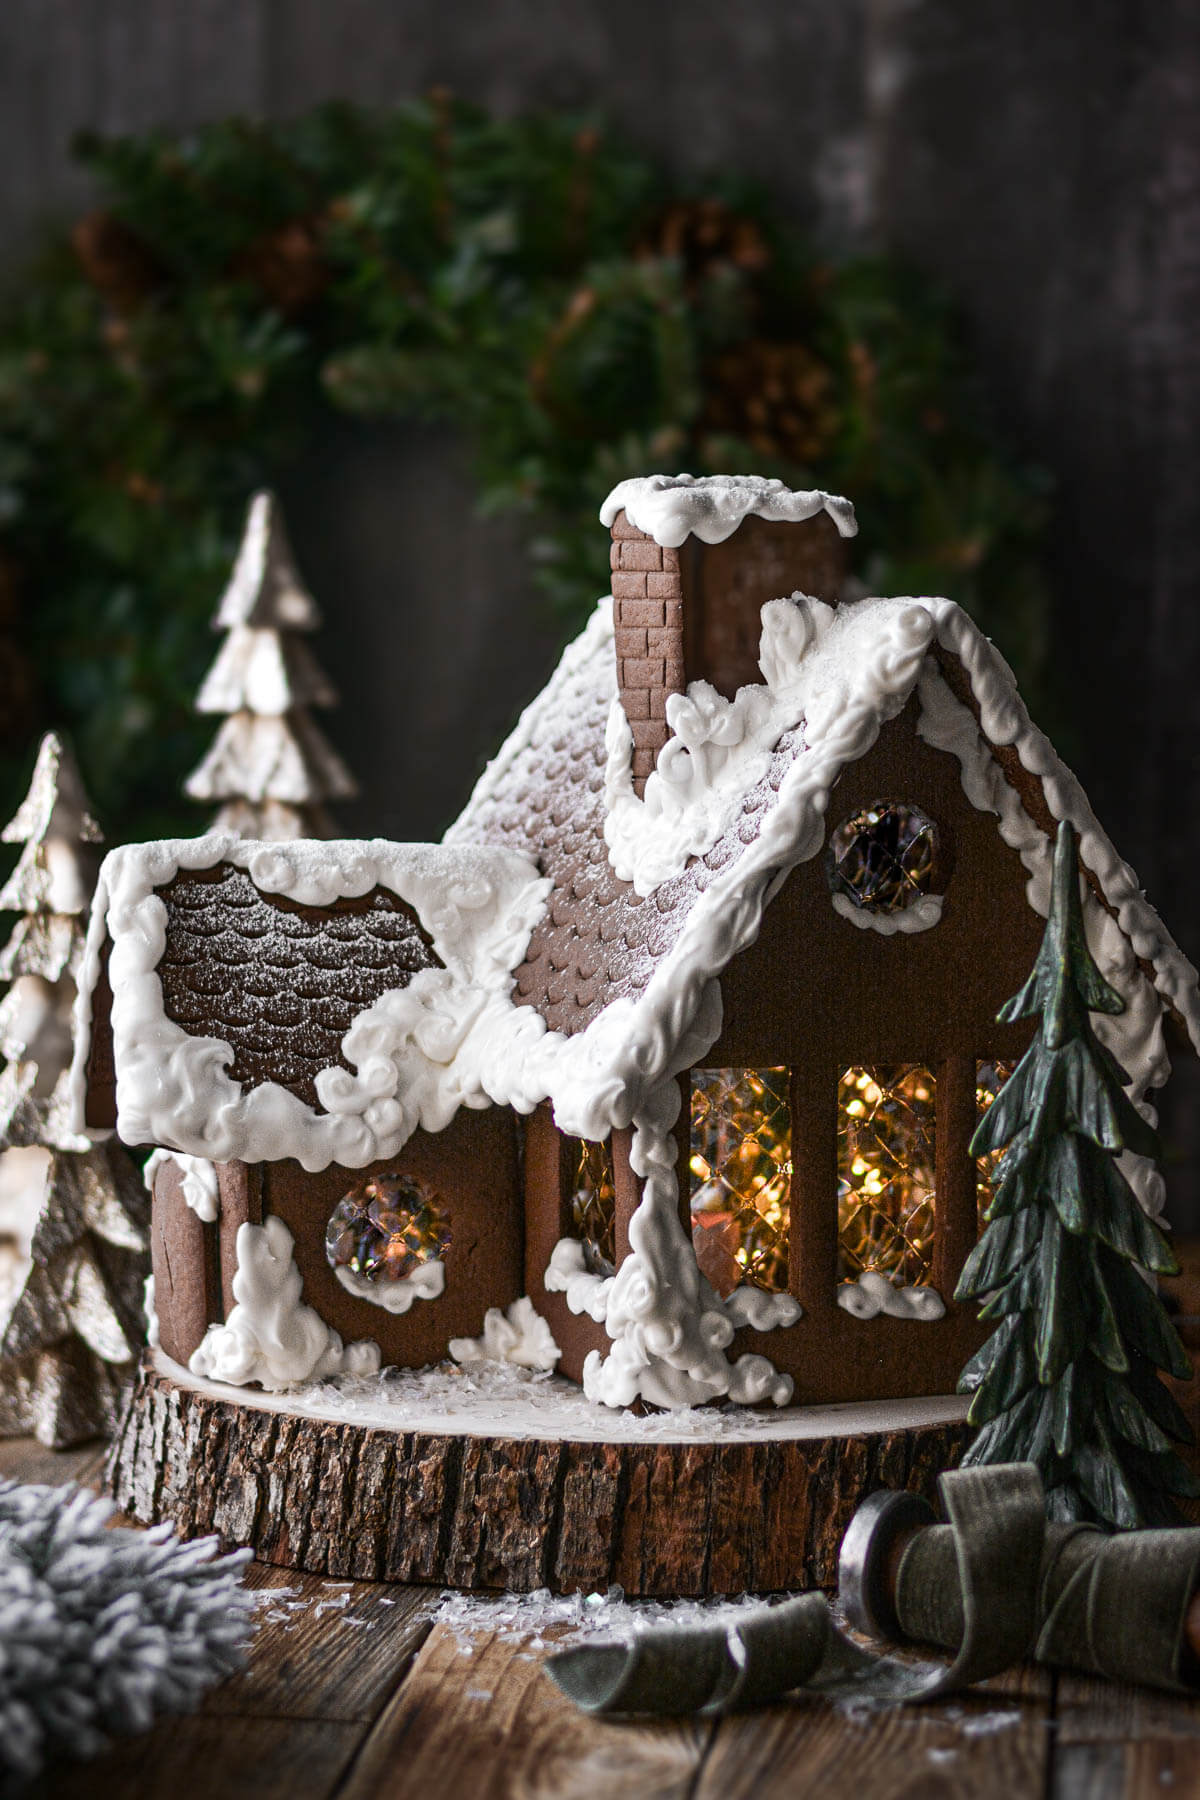 A homemade gingerbread house with icing snow, sitting on a wood slice, with lights inside the windows.